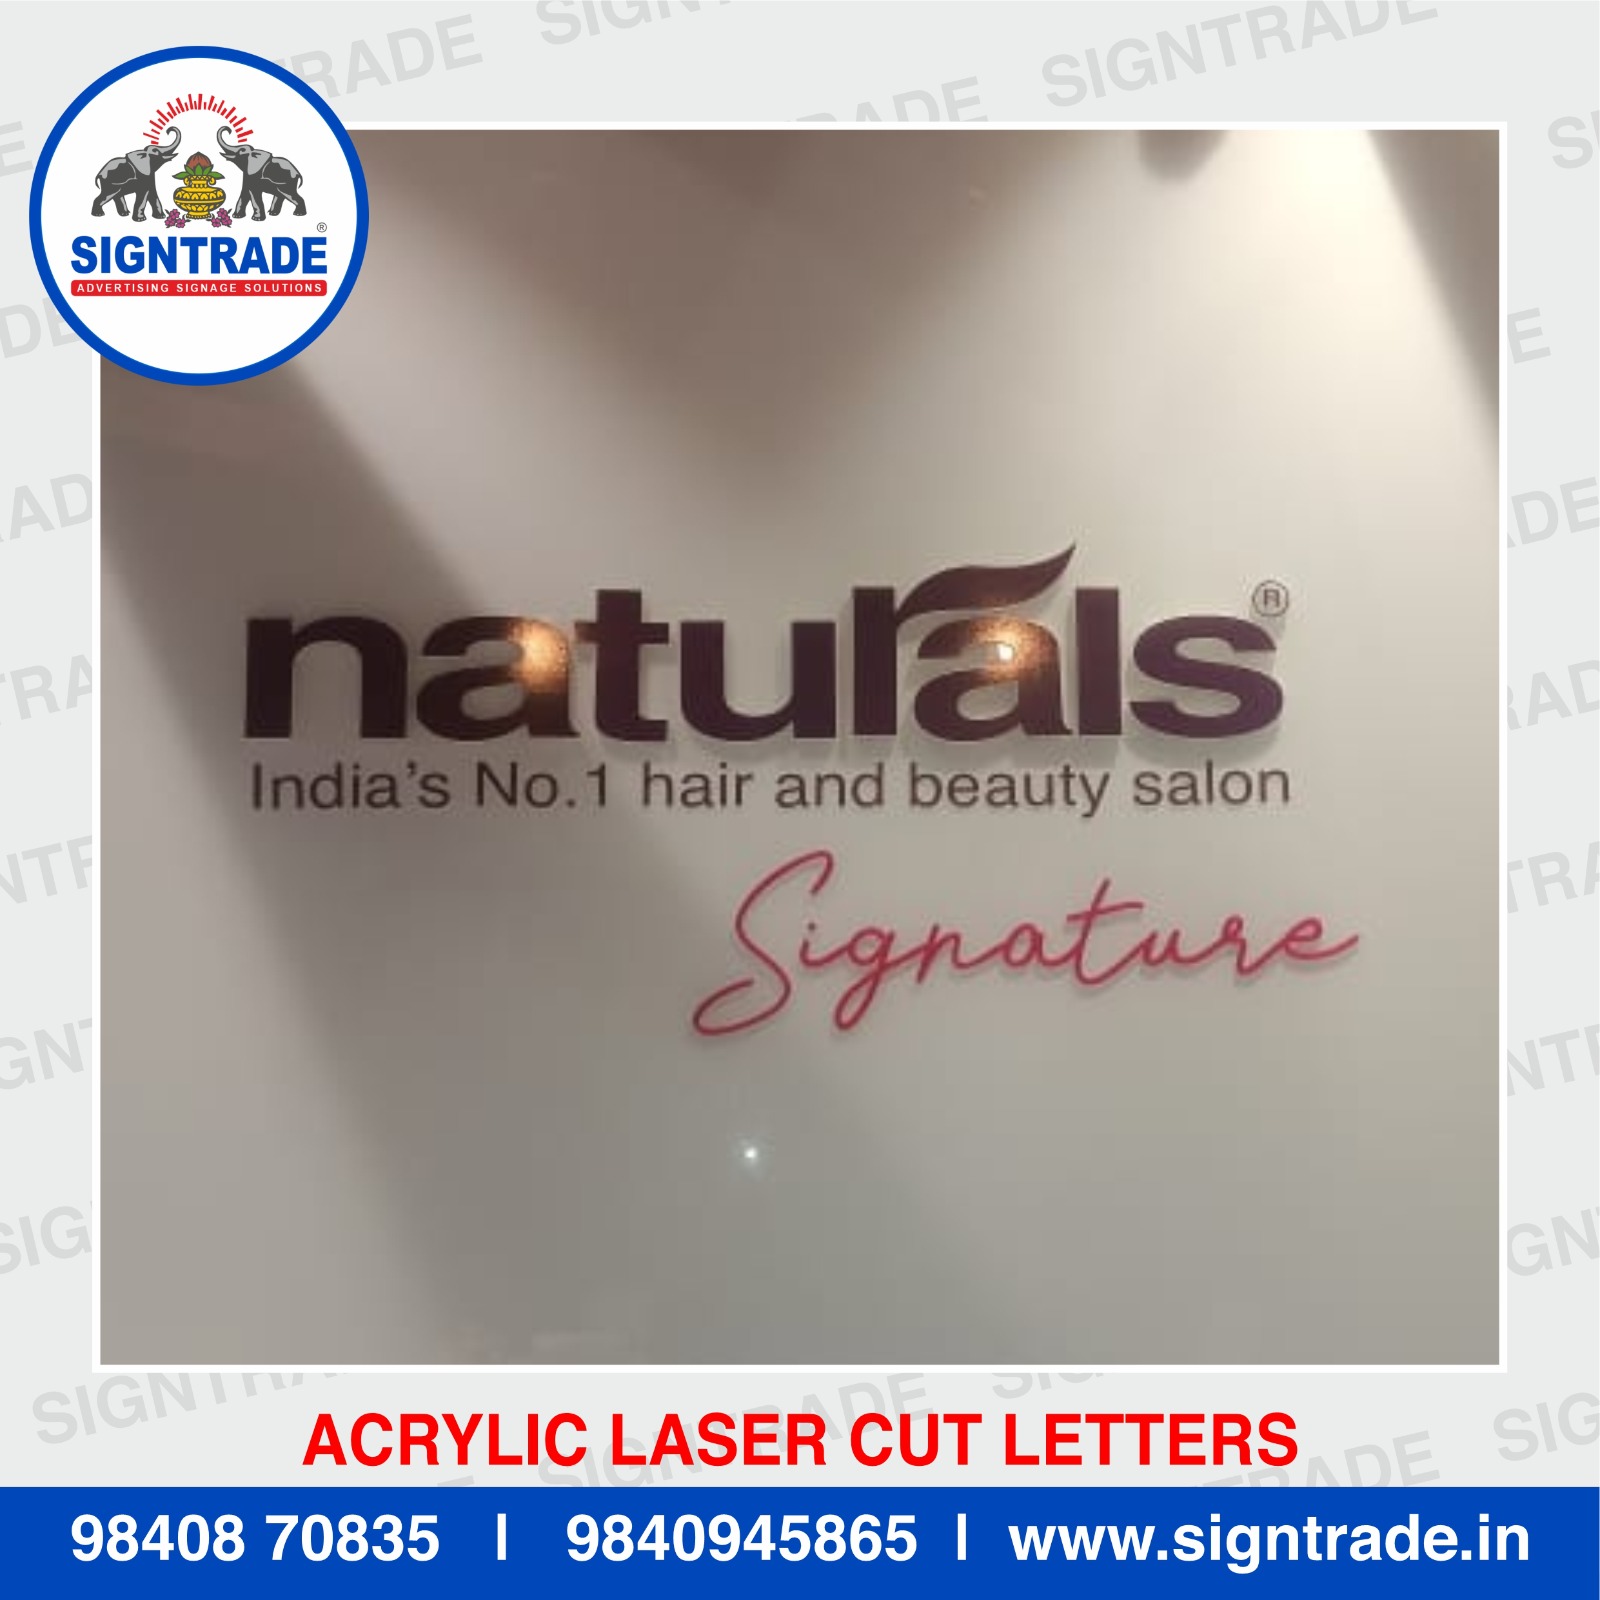 Acrylic Laser Cutting Letters in Chennai